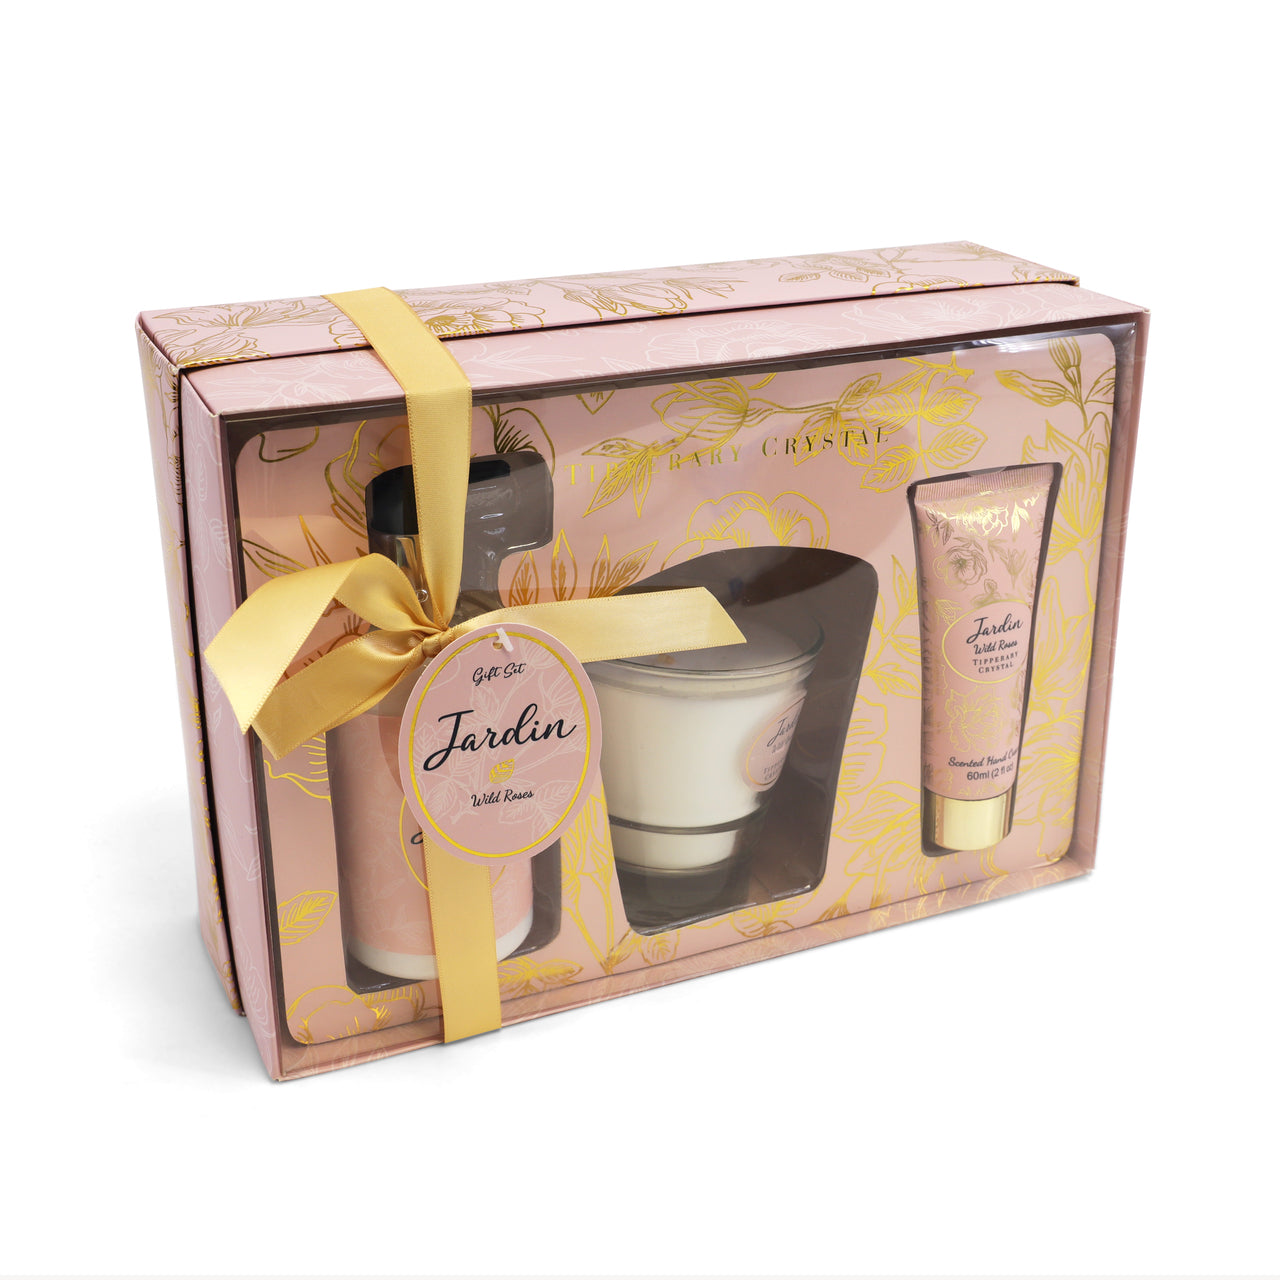 Tipperary Crystal Jardin Wild Roses Candle & Handcream Tube & Pump